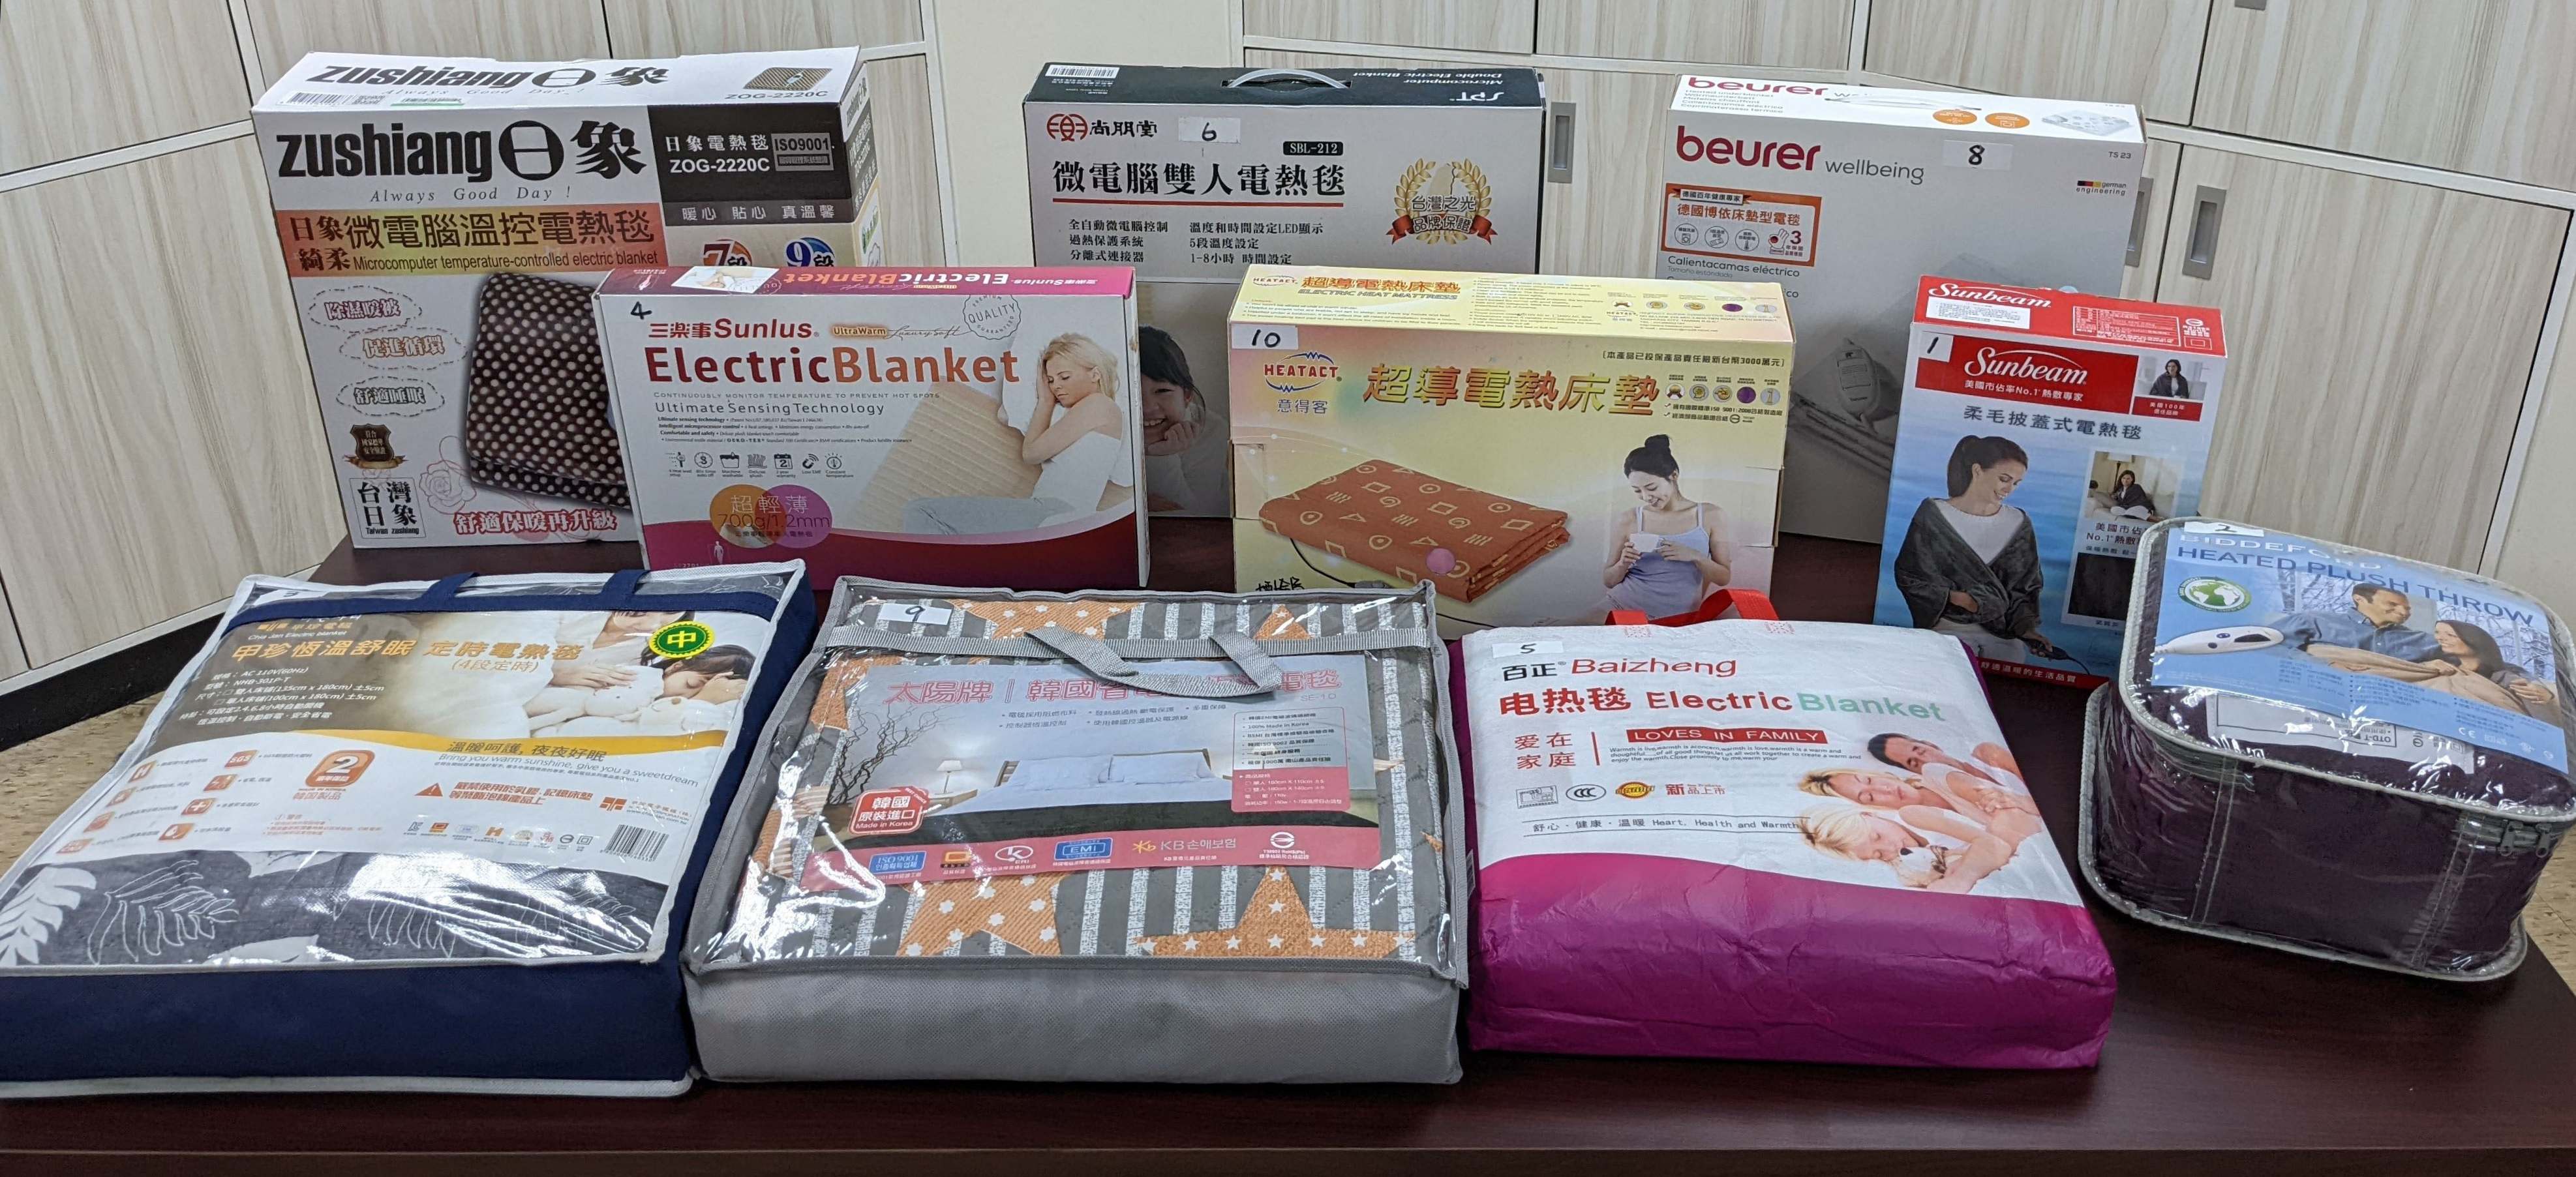 BSMI and Department of Consumer Protection, Executive Yuan, Jointly Released Test Results of Electric Blankets